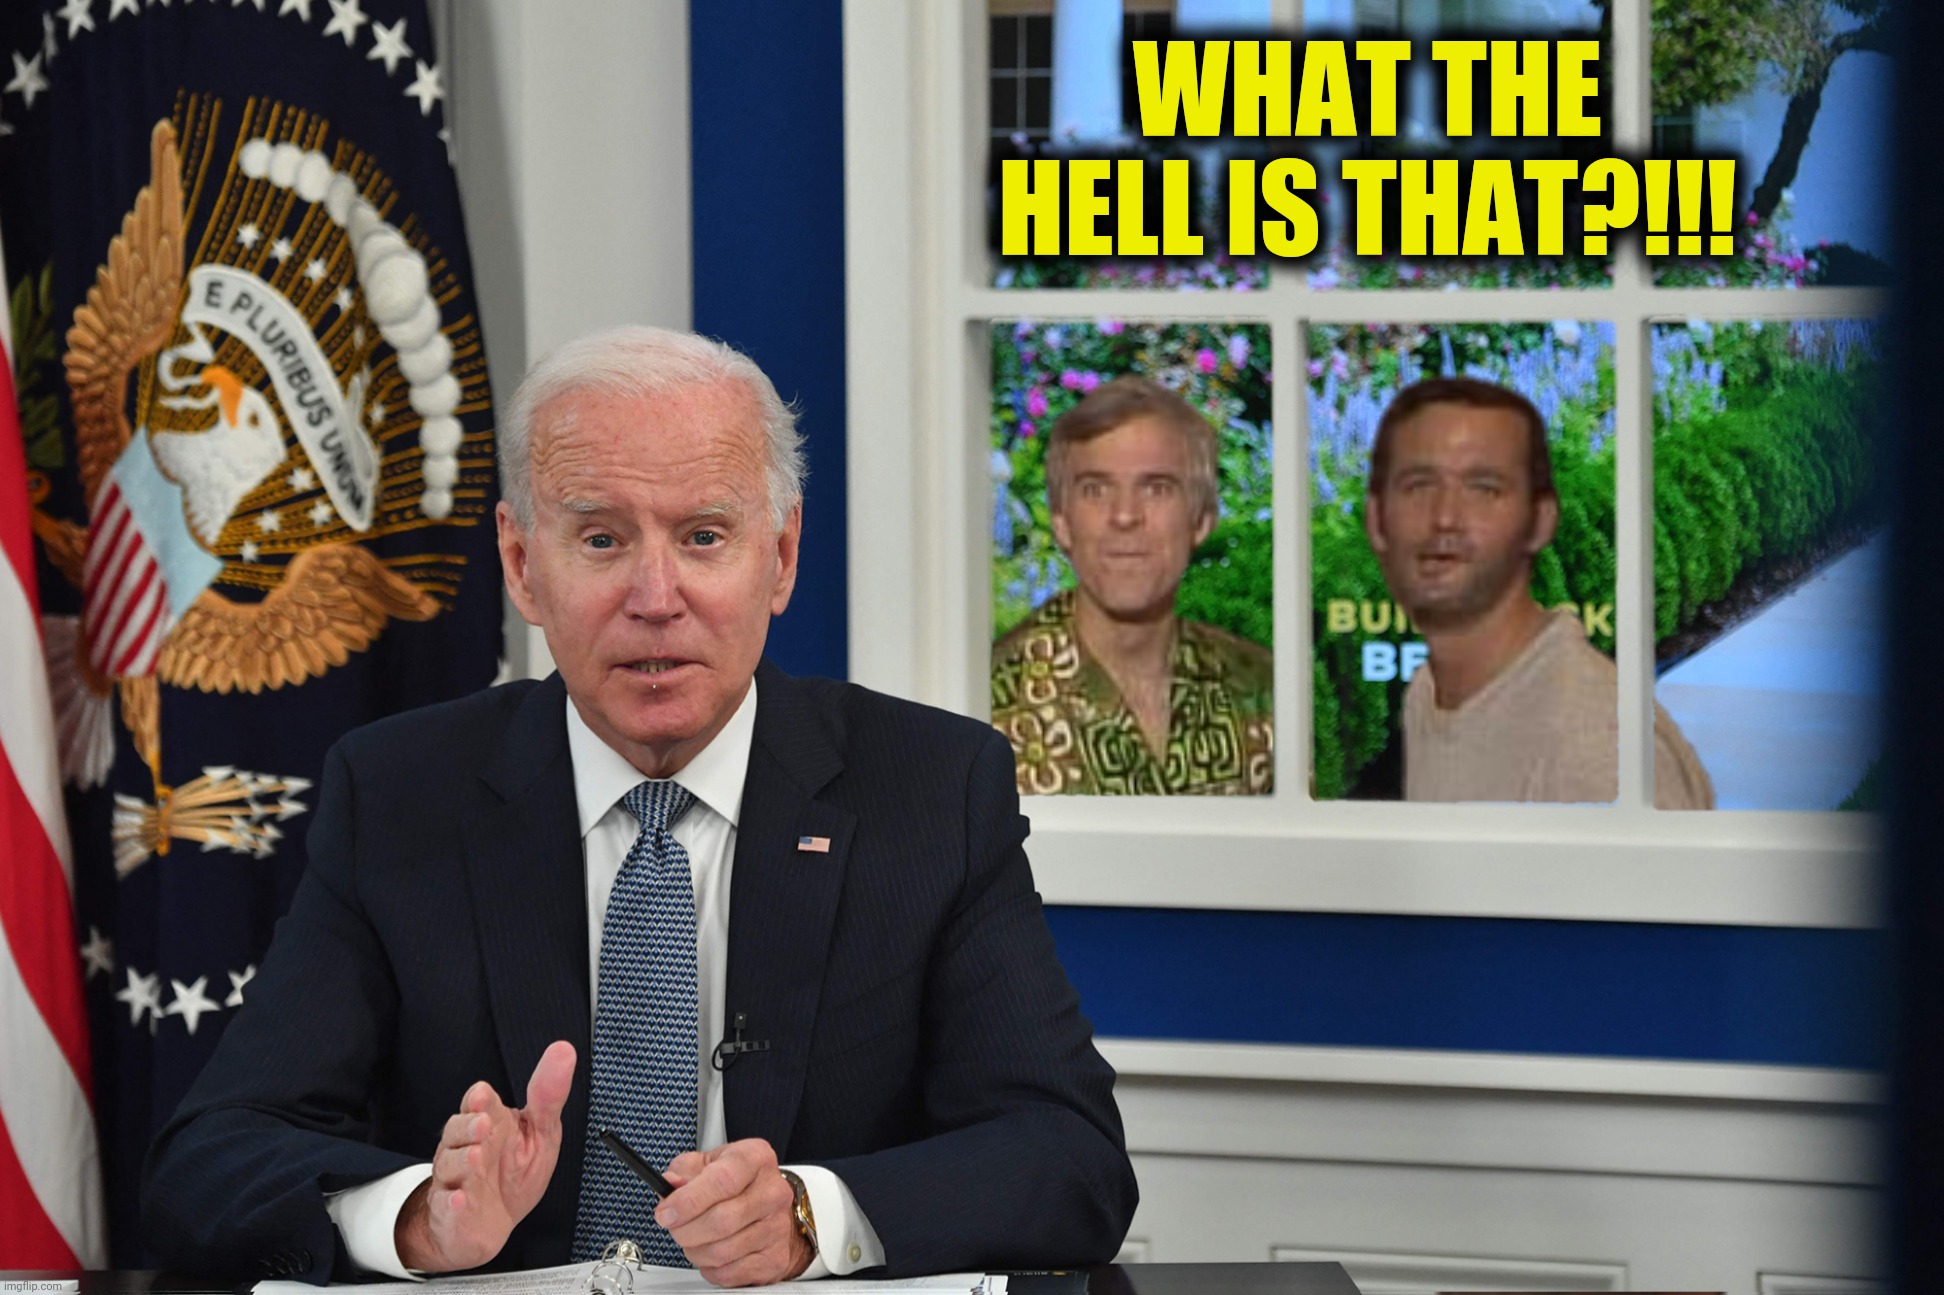 I know what the hell that is! | WHAT THE HELL IS THAT?!!! | image tagged in bad photoshop,joe biden,steve martin,bill murray,what the hell is that | made w/ Imgflip meme maker